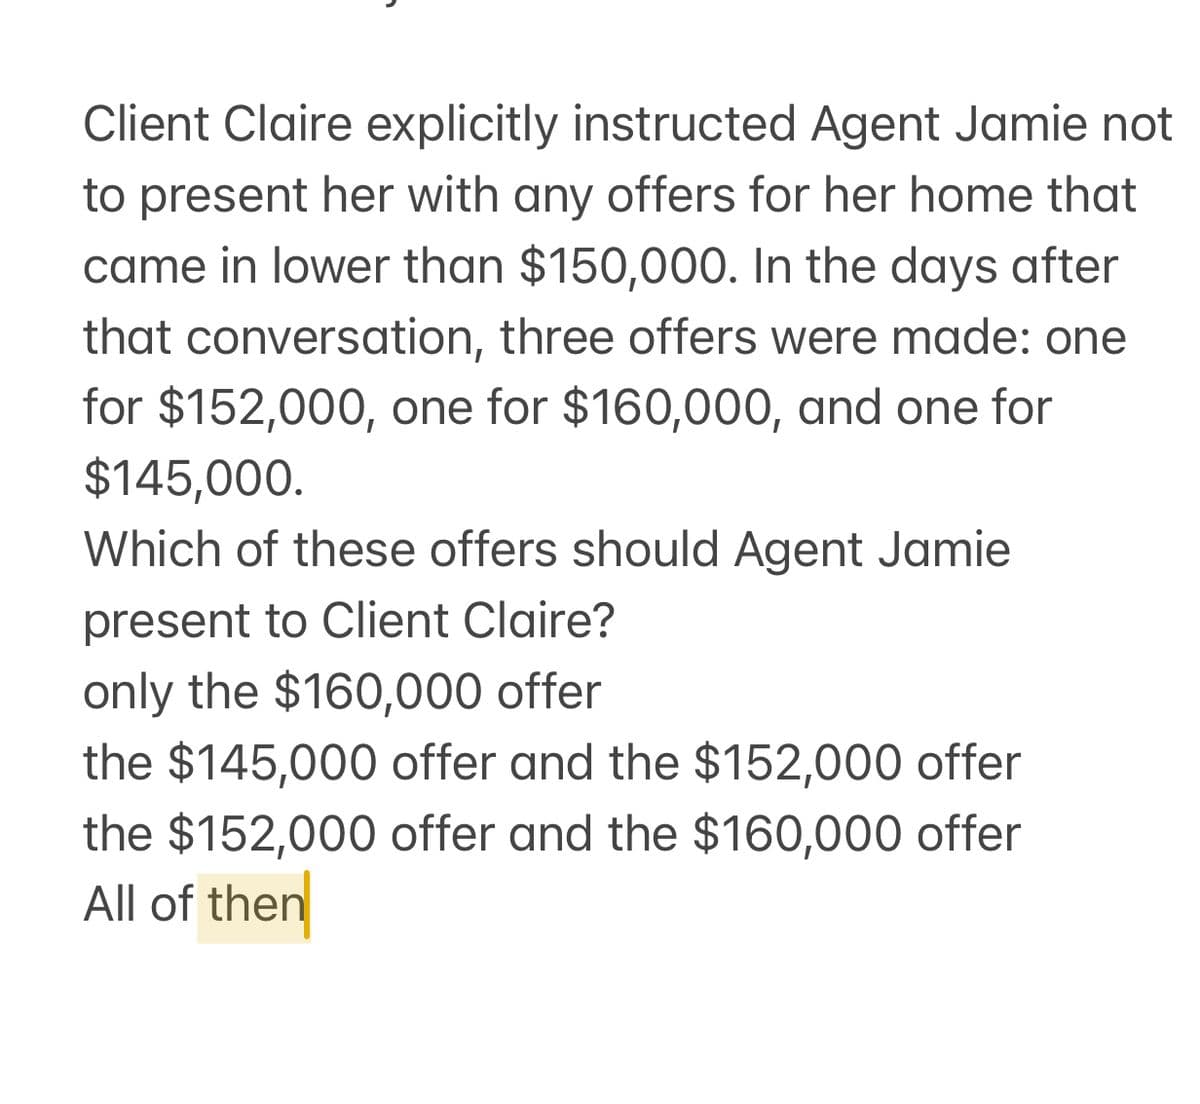 Client Claire explicitly instructed Agent Jamie not
to present her with any offers for her home that
came in lower than $150,000. In the days after
that conversation, three offers were made: one
for $152,000, one for $160,000, and one for
$145,000.
Which of these offers should Agent Jamie
present to Client Claire?
only the $160,000 offer
the $145,000 offer and the $152,000 offer
the $152,000 offer and the $160,000 offer
All of then